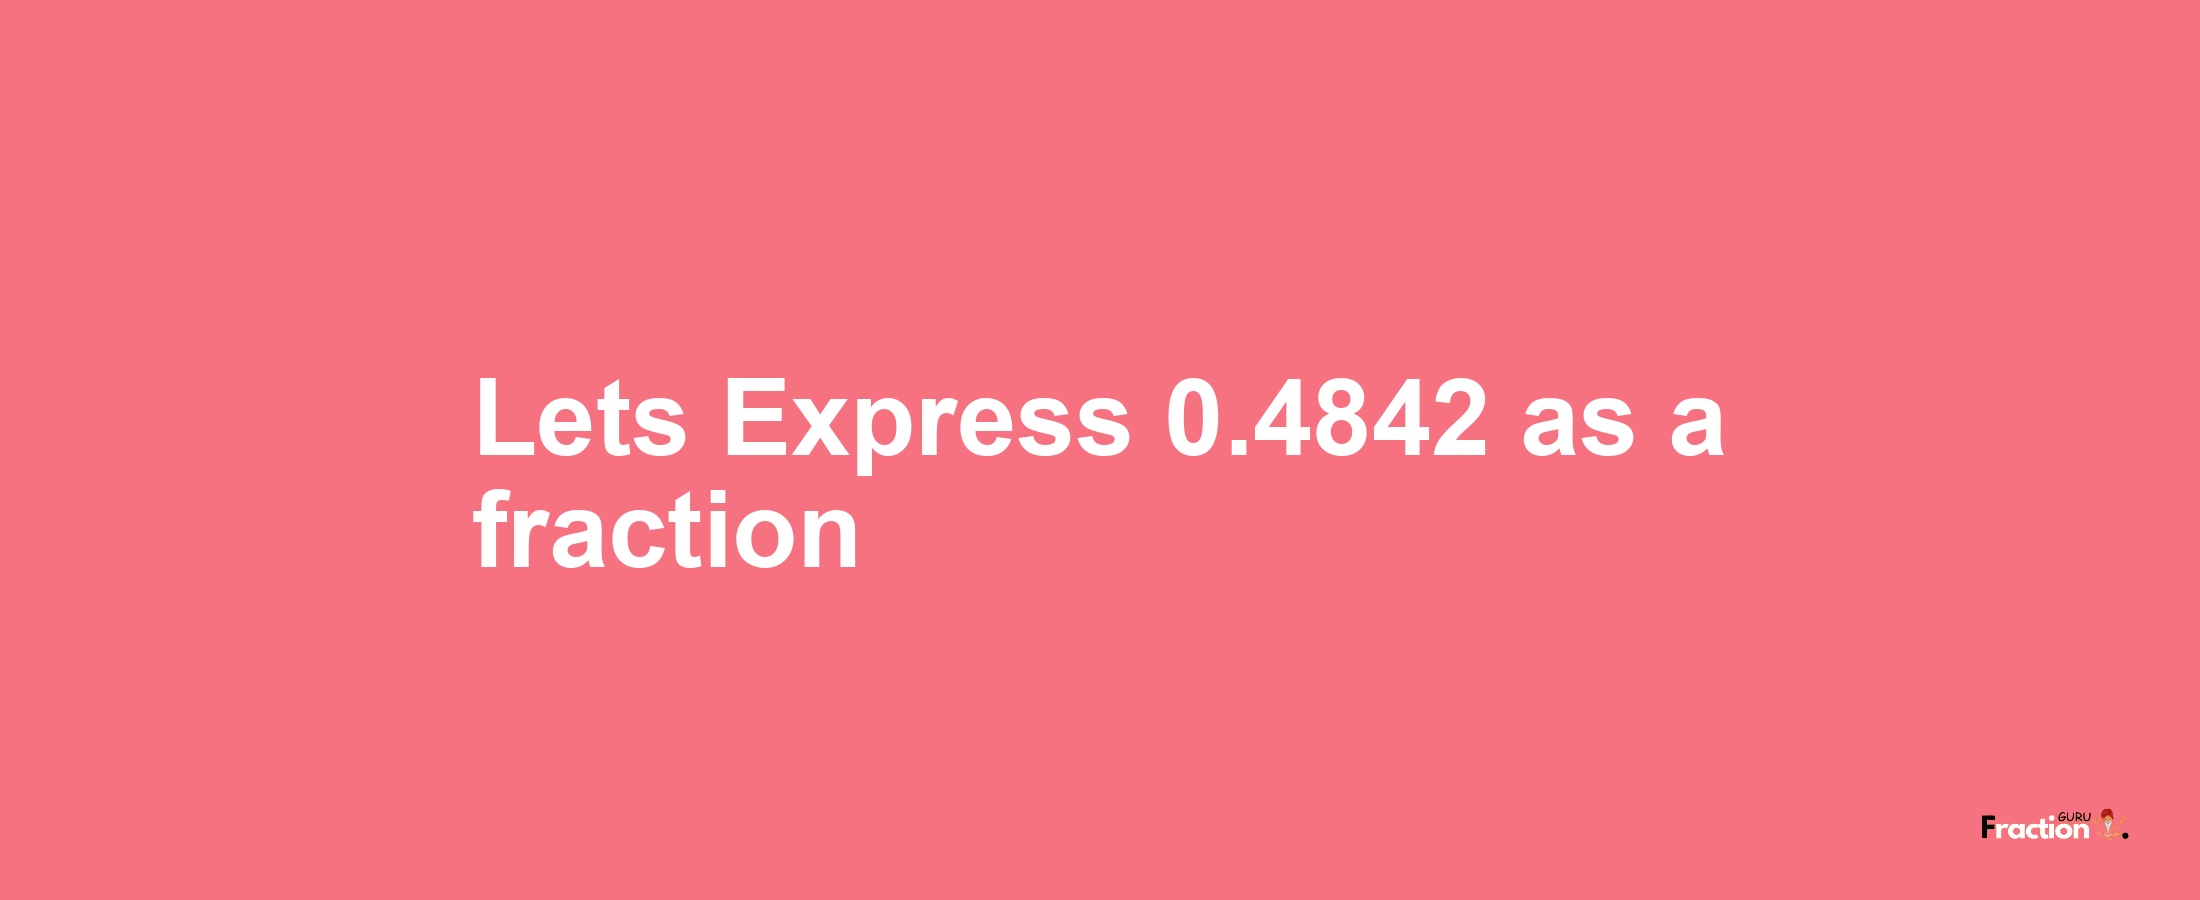 Lets Express 0.4842 as afraction